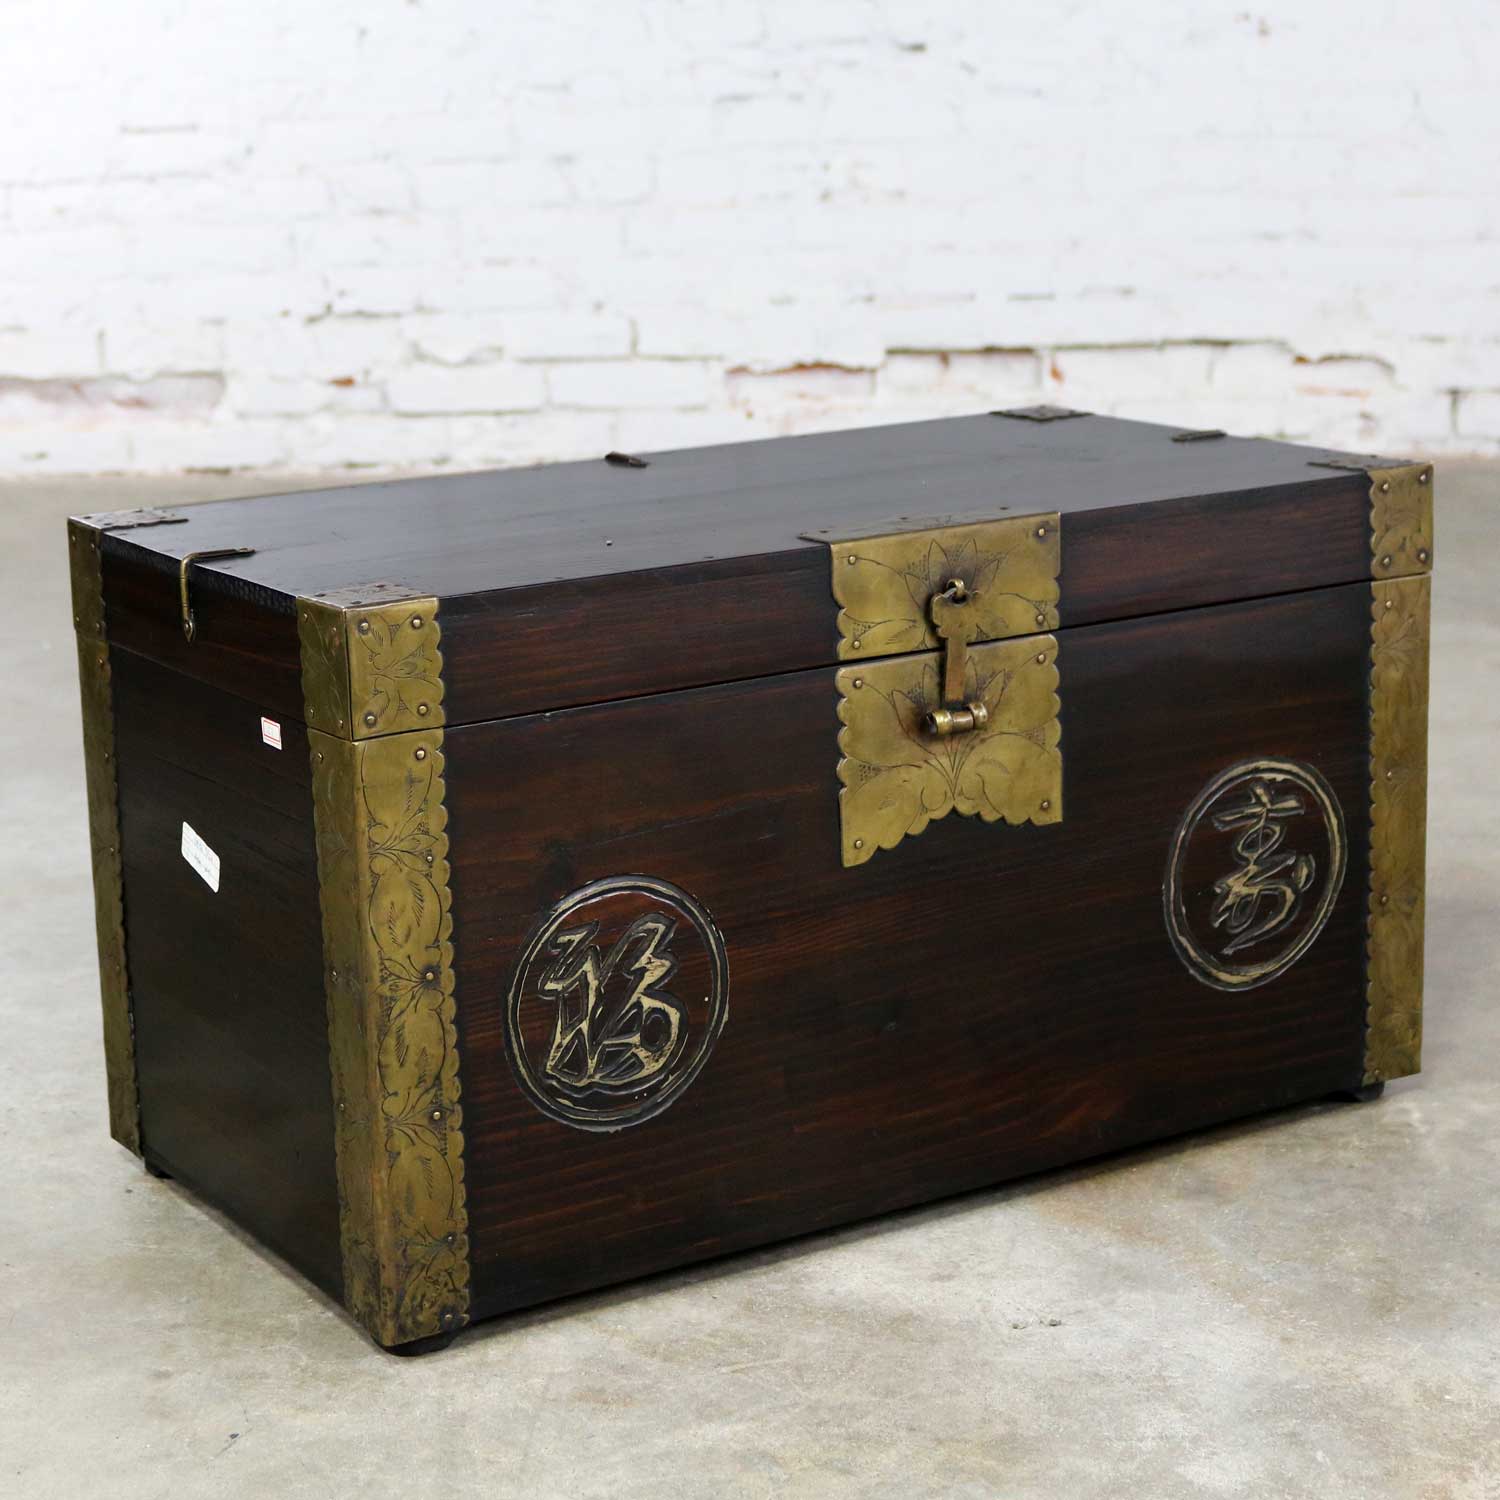 Antique Korean Trunk Chest or Box Circa 1920s with Luck and Longevity Characters